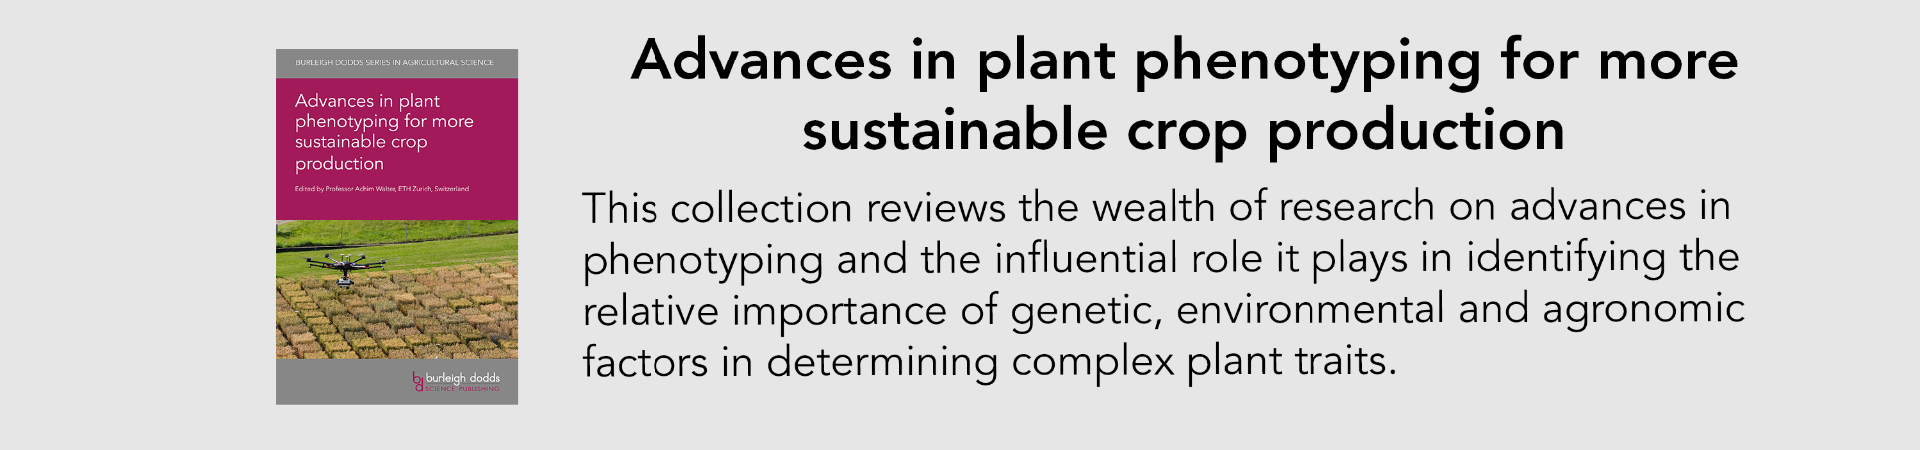 Advances in plant phenotyping for more sustainable crop production